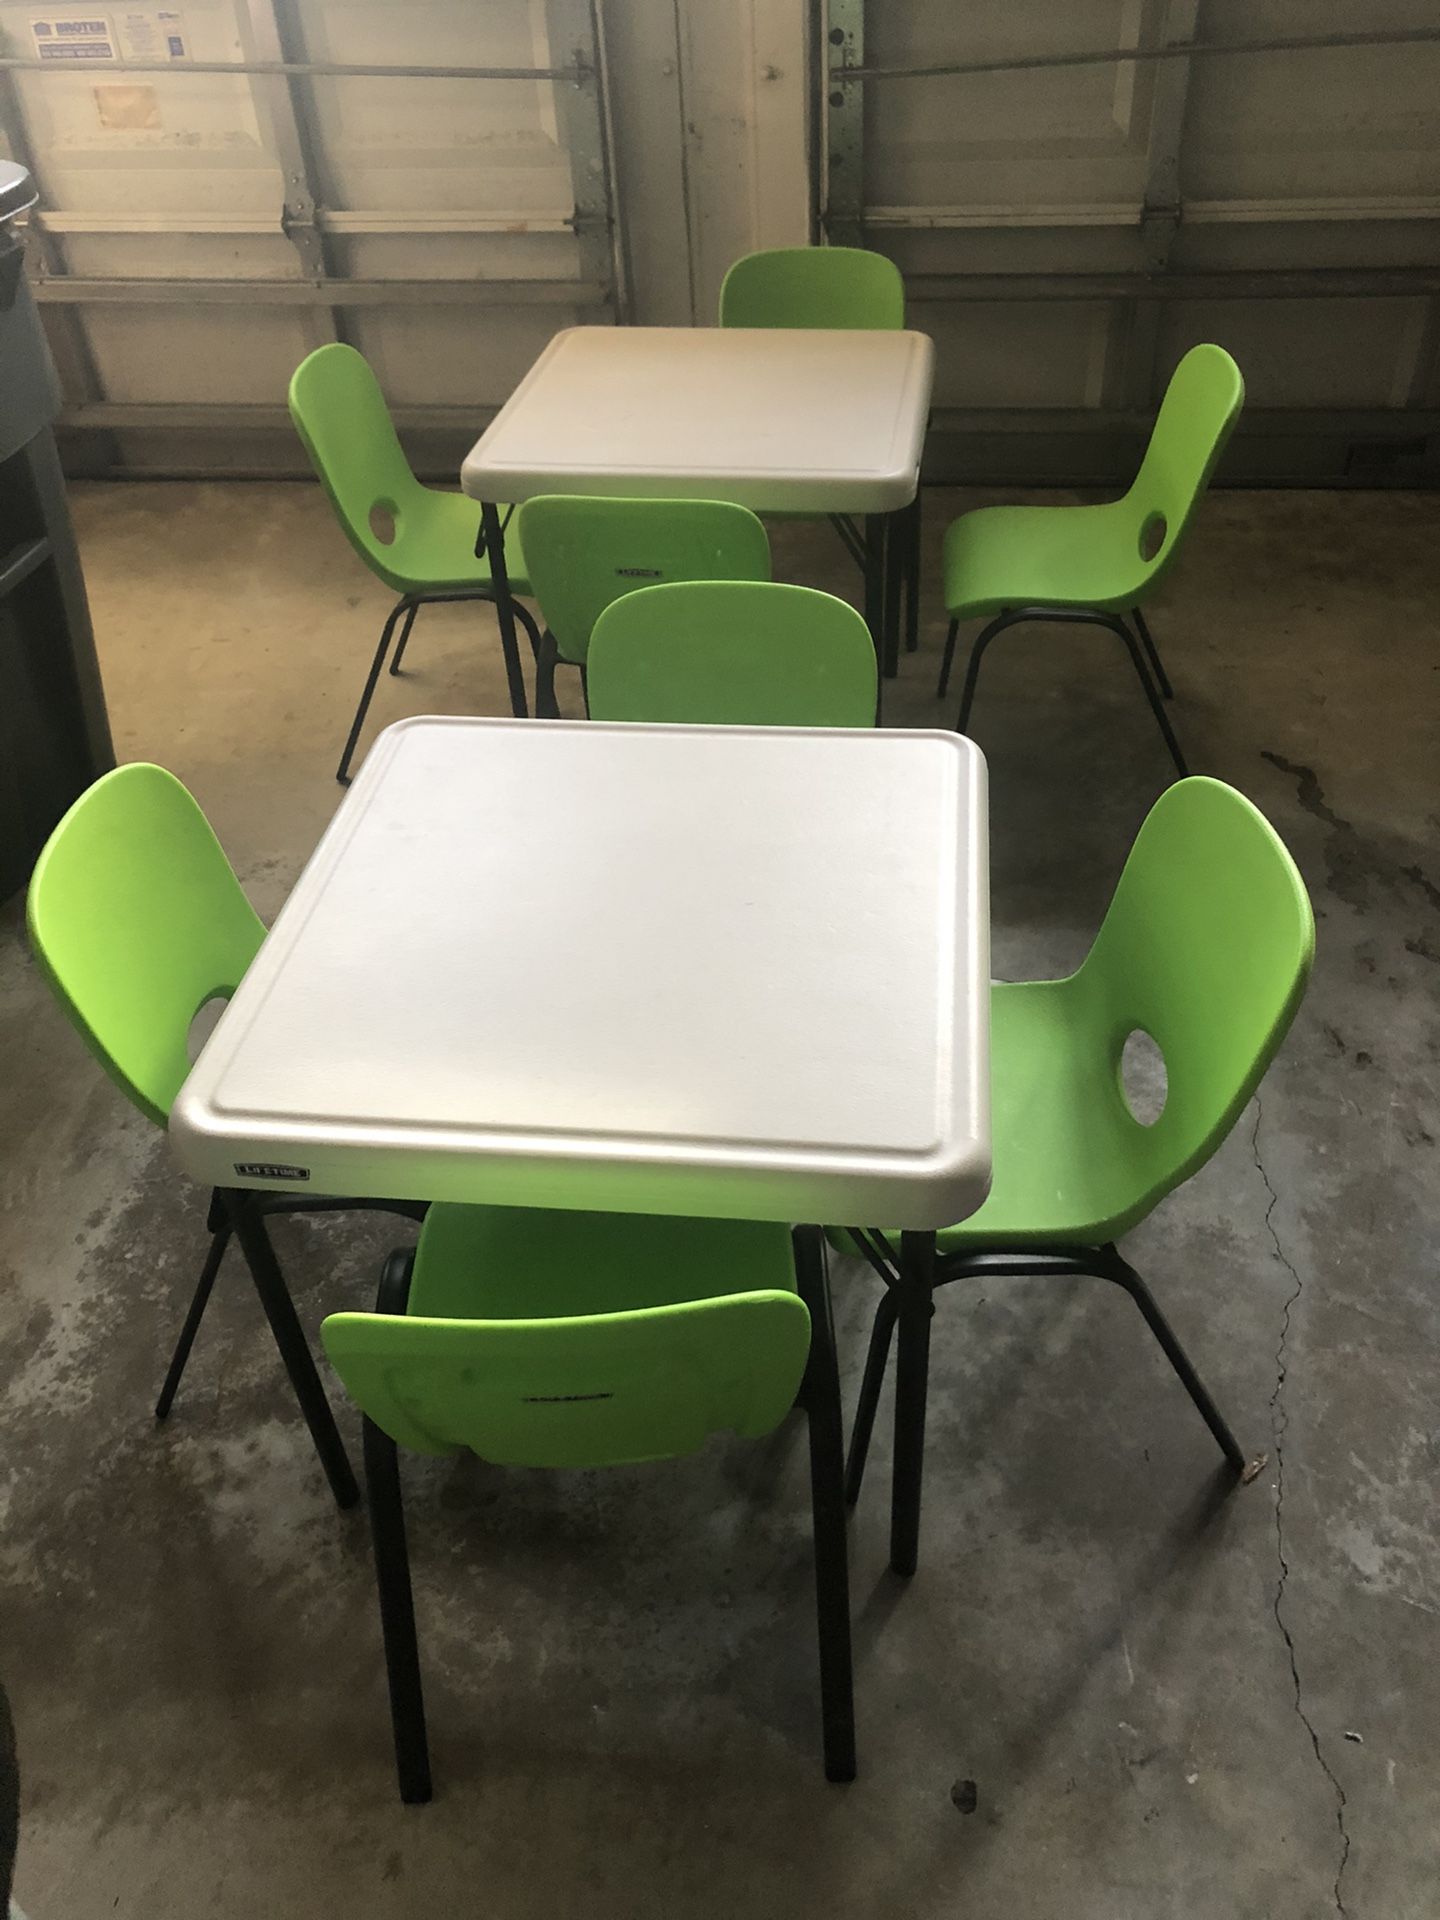 1 table and 4 chairs for kids